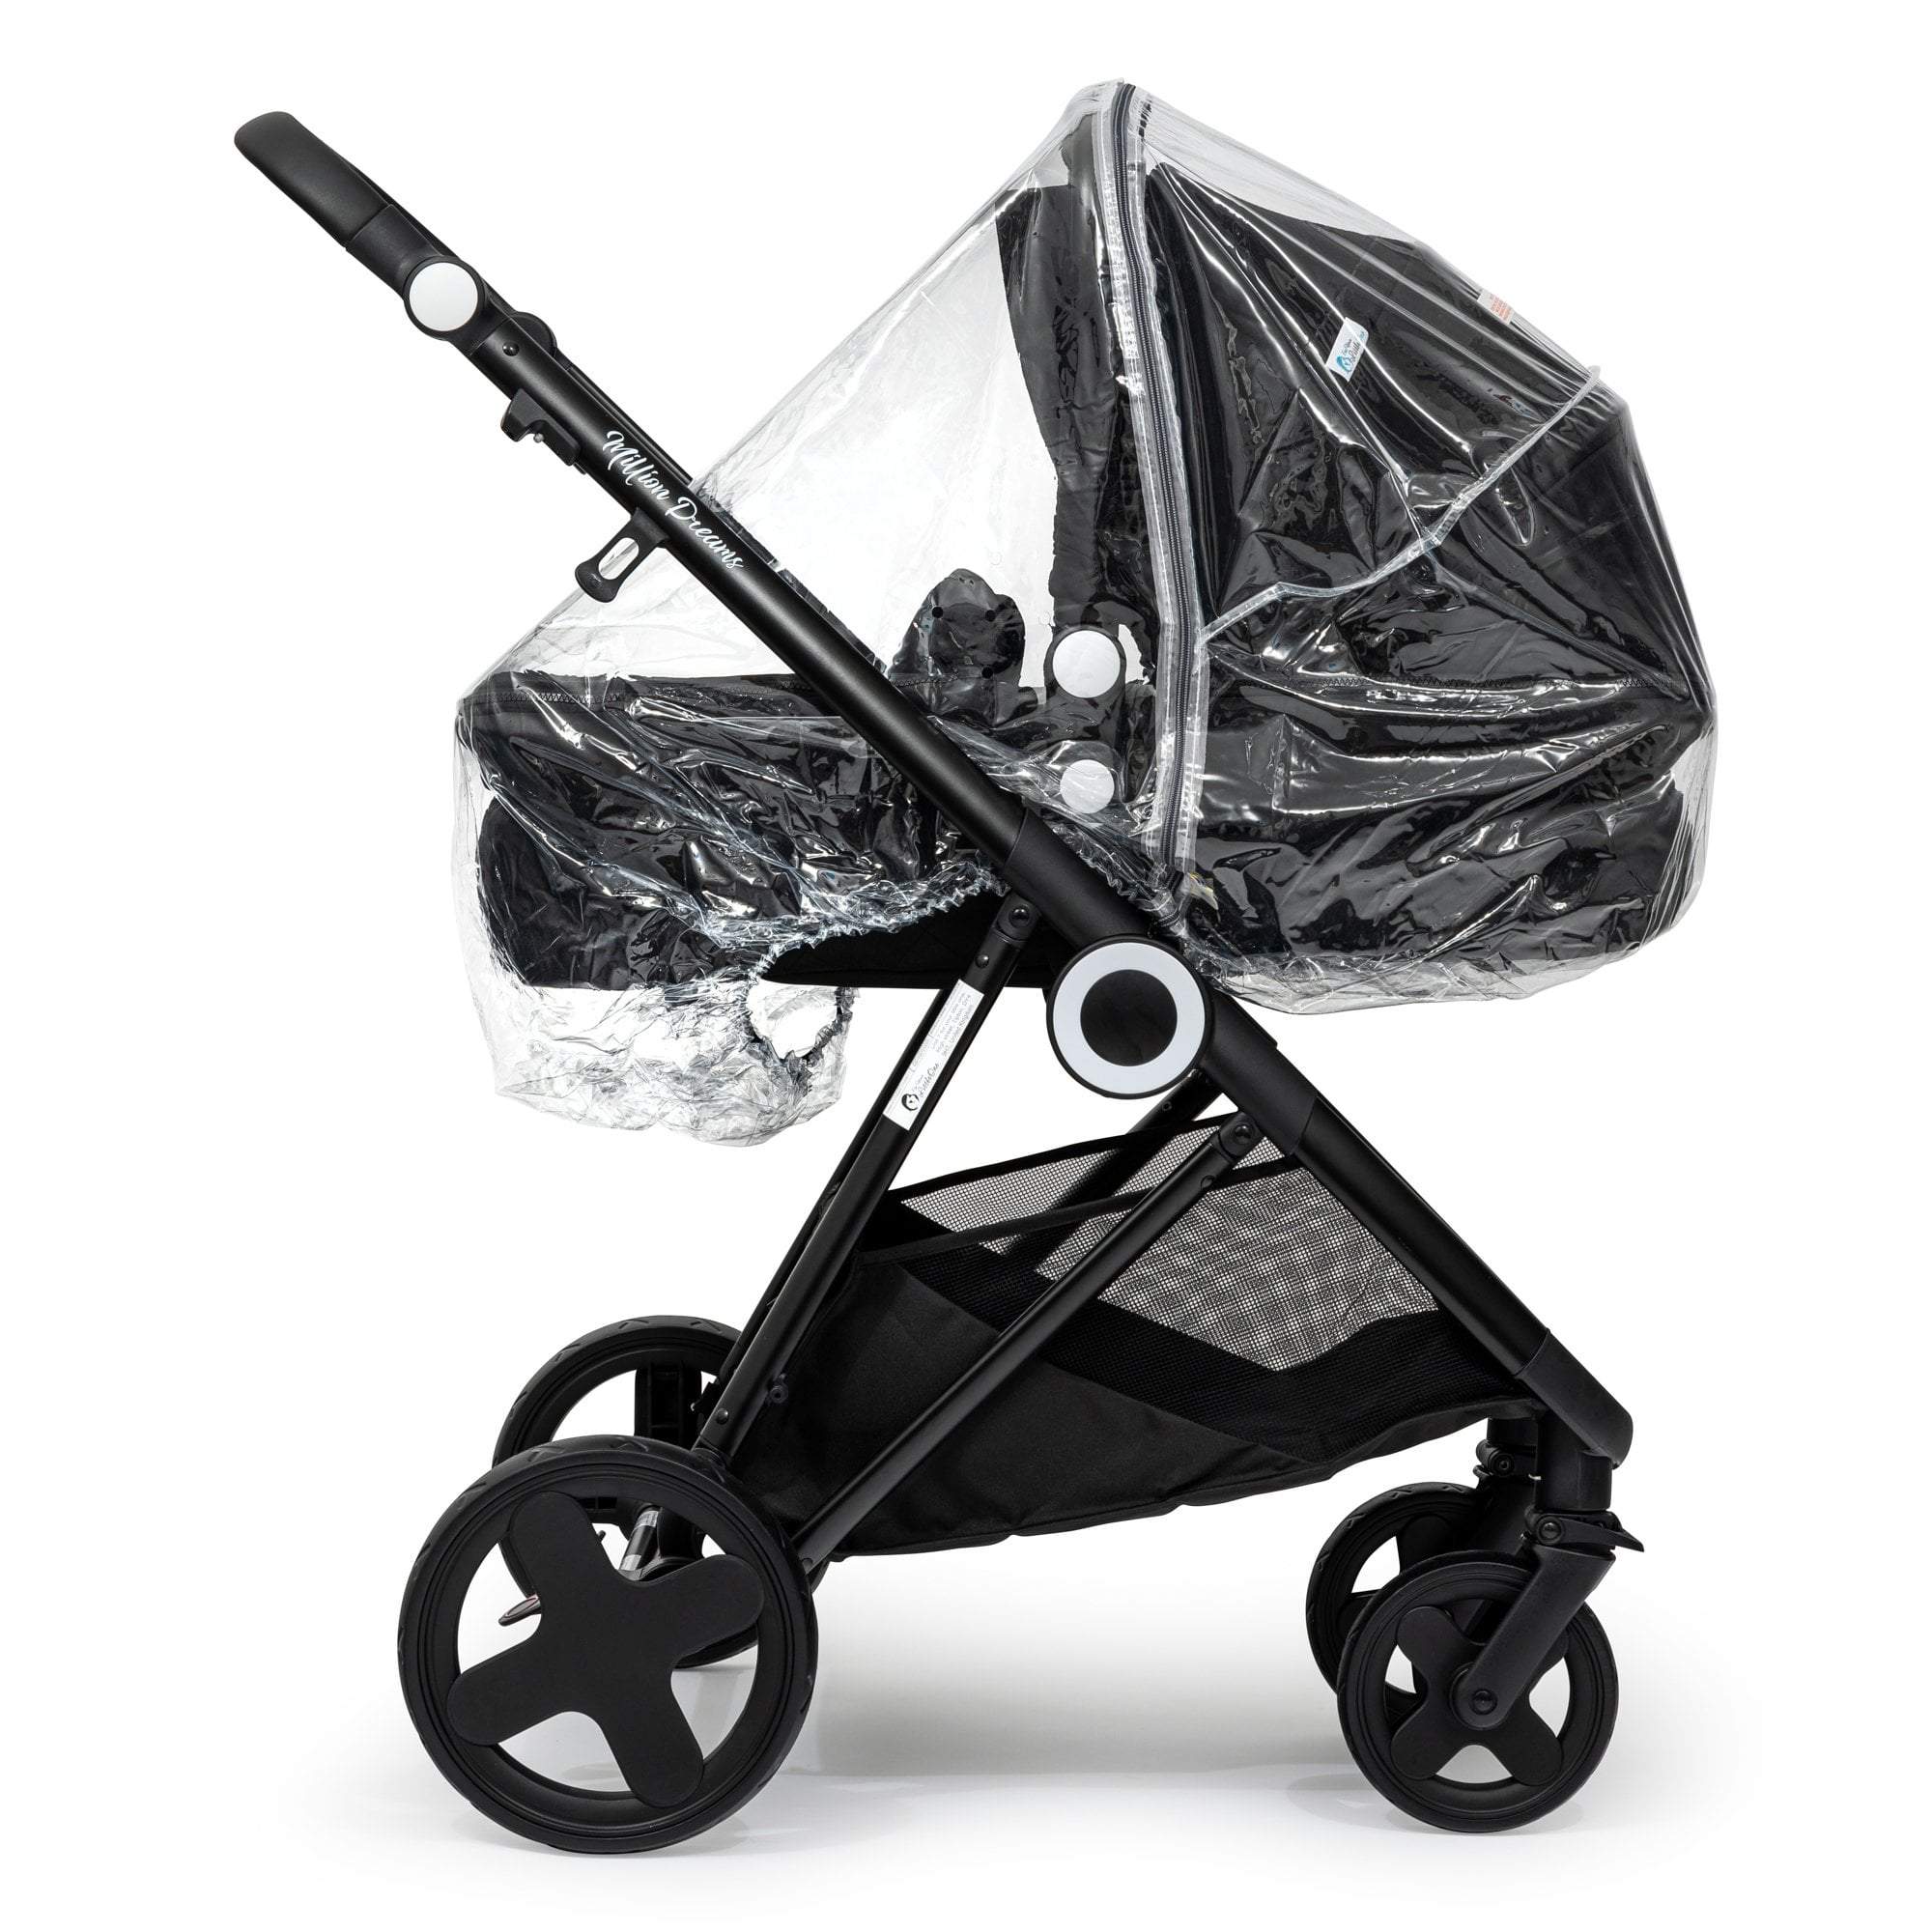 Carrycot Raincover Compatible With BabyStyle - Fits All Models - For Your Little One